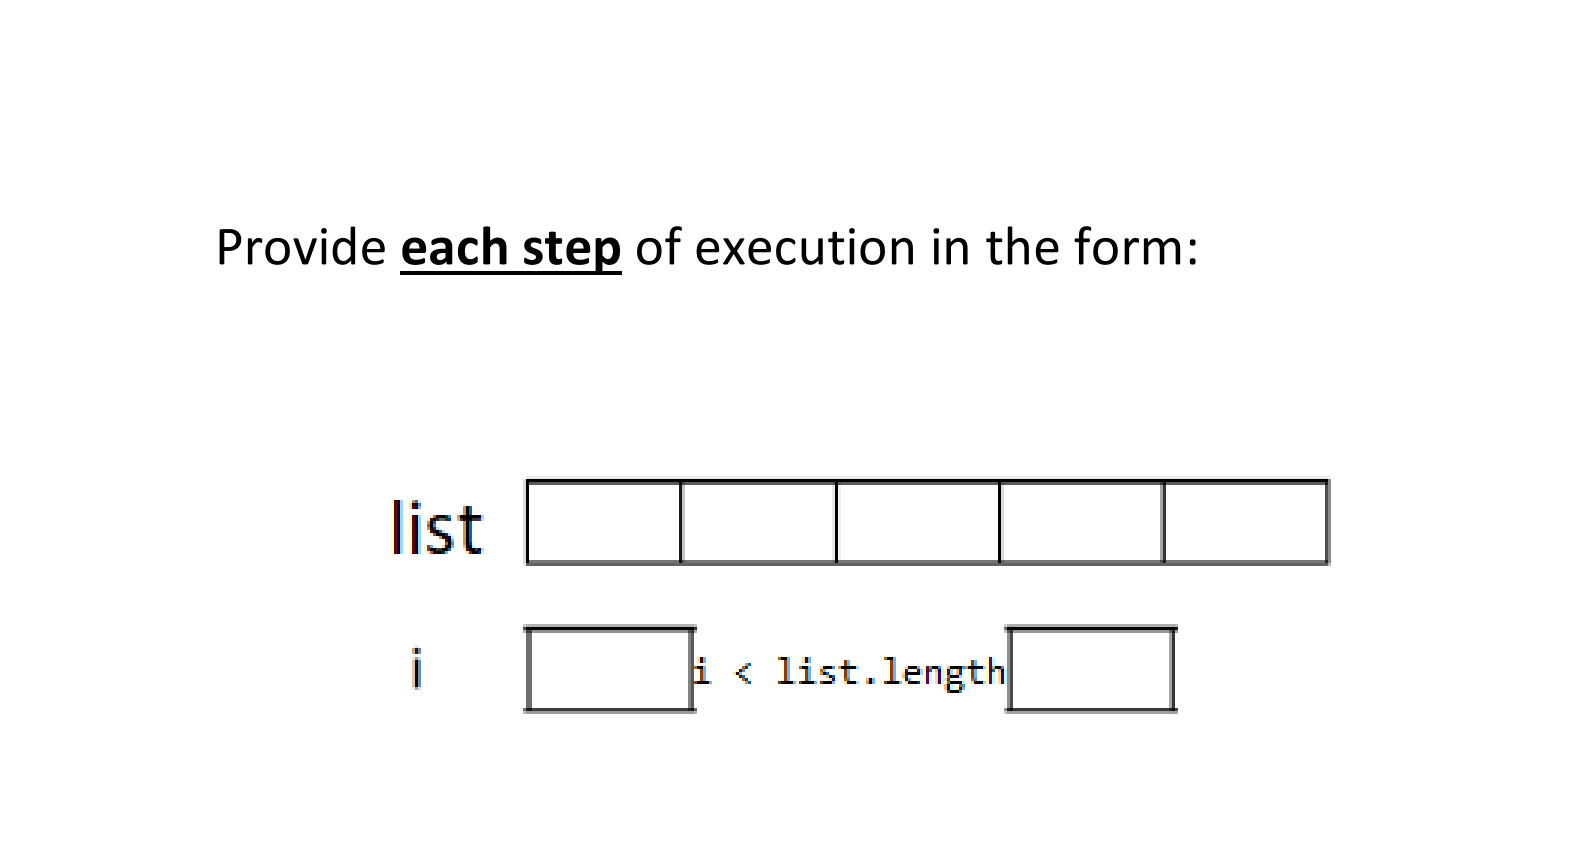 Provide each step of execution in the form:
list
i
i < list.length
